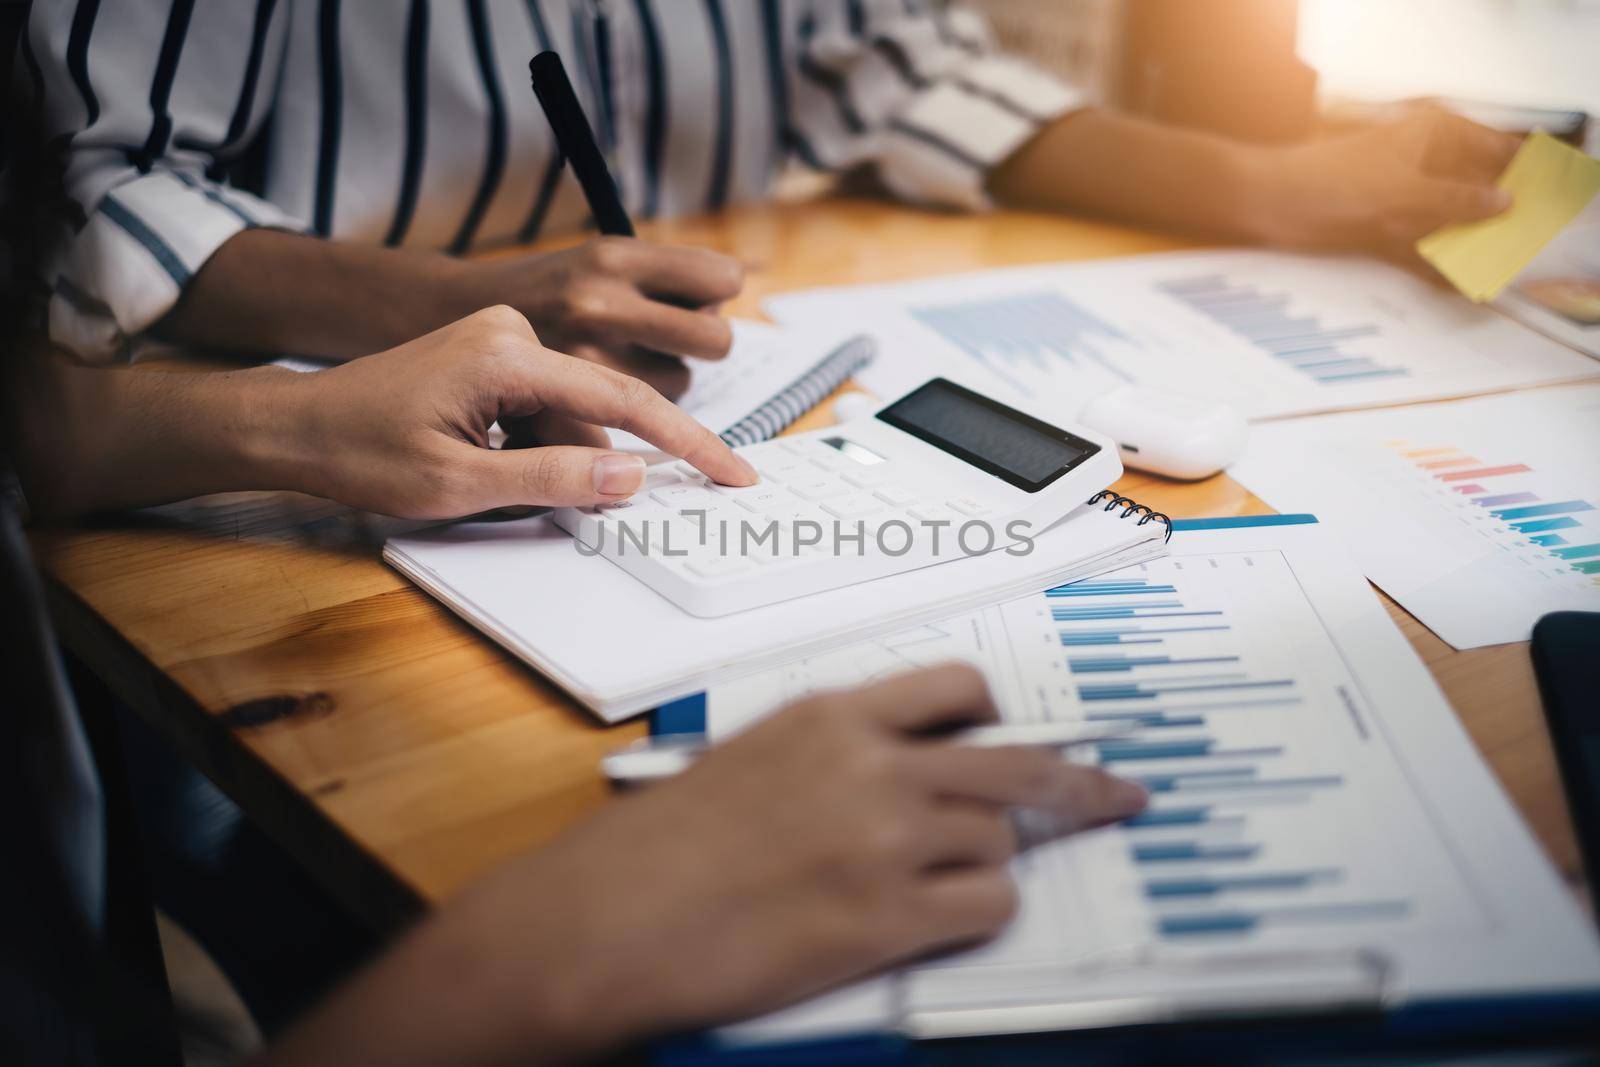 During a business meeting with colleagues, a company marketologist gives a presentation about market plan and investment and pointing at paperwork.